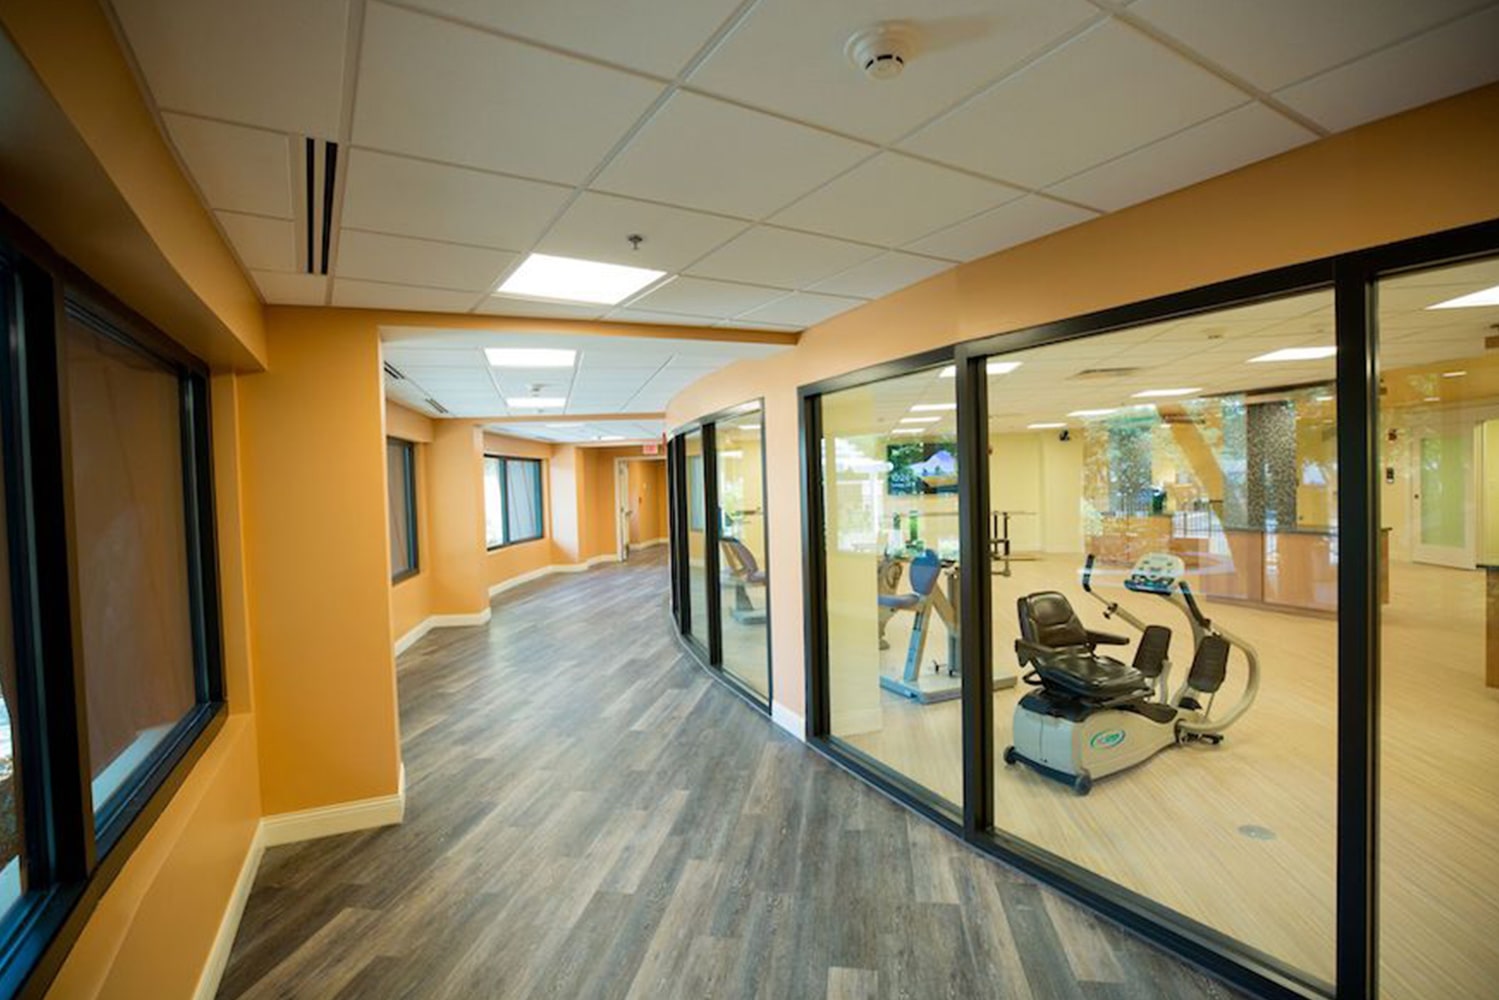 Curved hallway outside of the gym facility looking into floor to ceiling windows showing the fitness machines